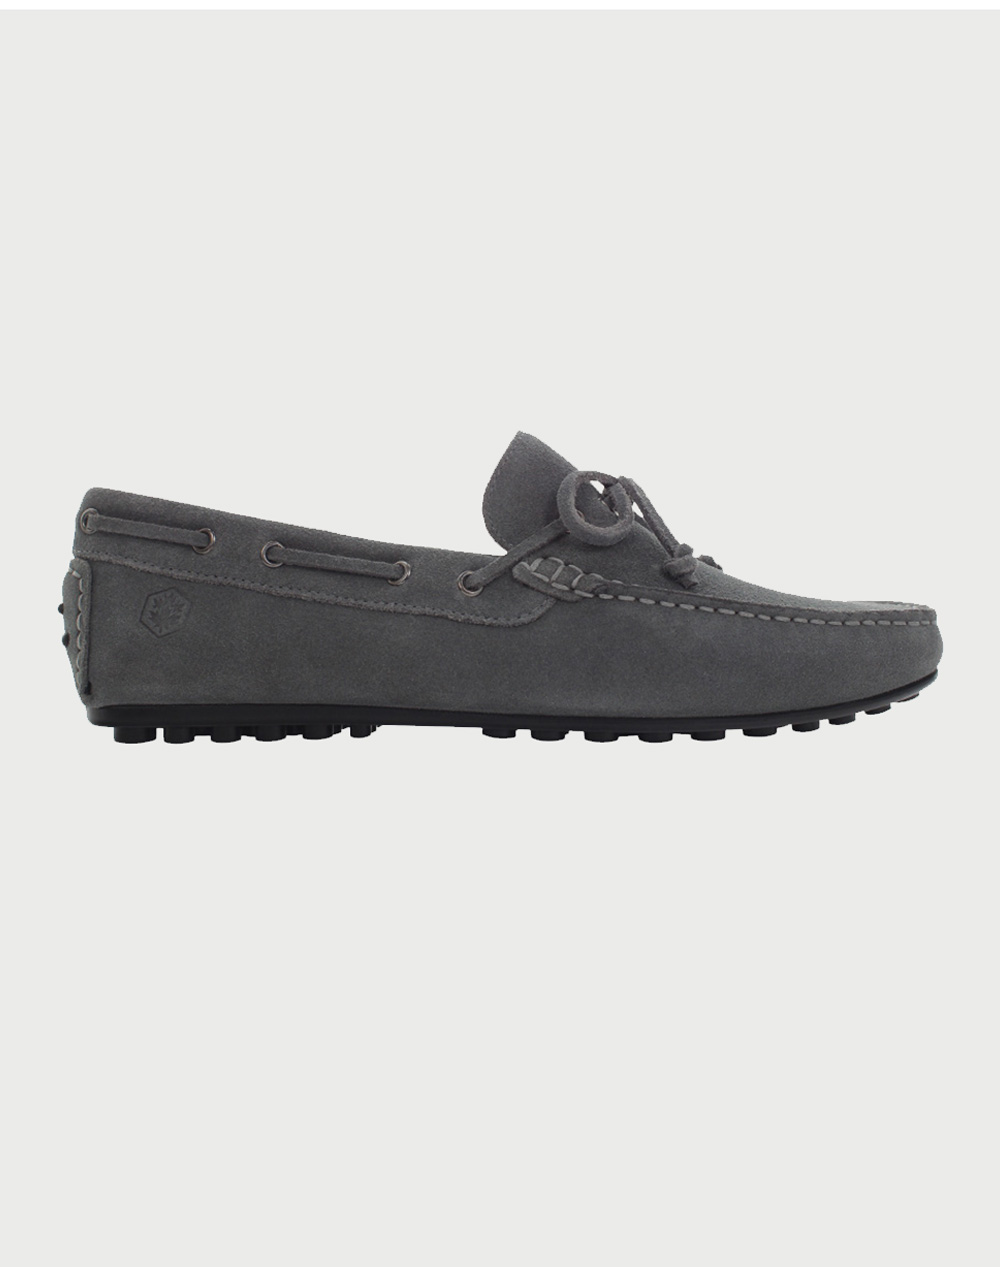 LUMBERJACK MAIN DRIVE MOCASSIN LACE UP SUEDE ΠΑΠΟΥΤΣΙ ΑΝΔΡΙΚΟ SM81802002A01-CD017 Gray 3820ALUMB6040003_XR30455